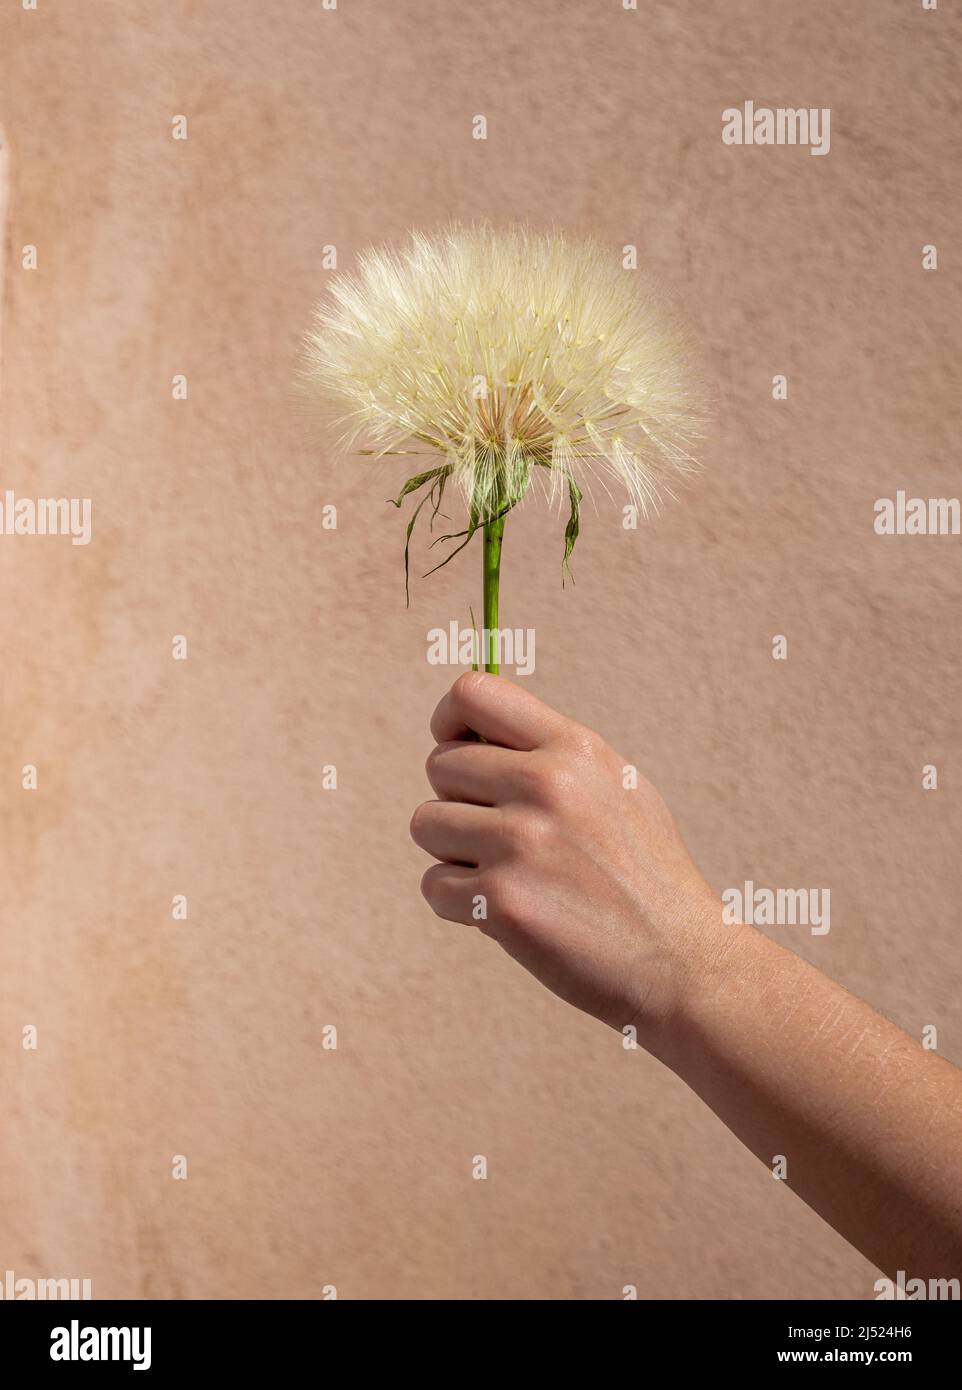 giant dandelion or salsify held againts a textured background .summer spring . Stock Photo